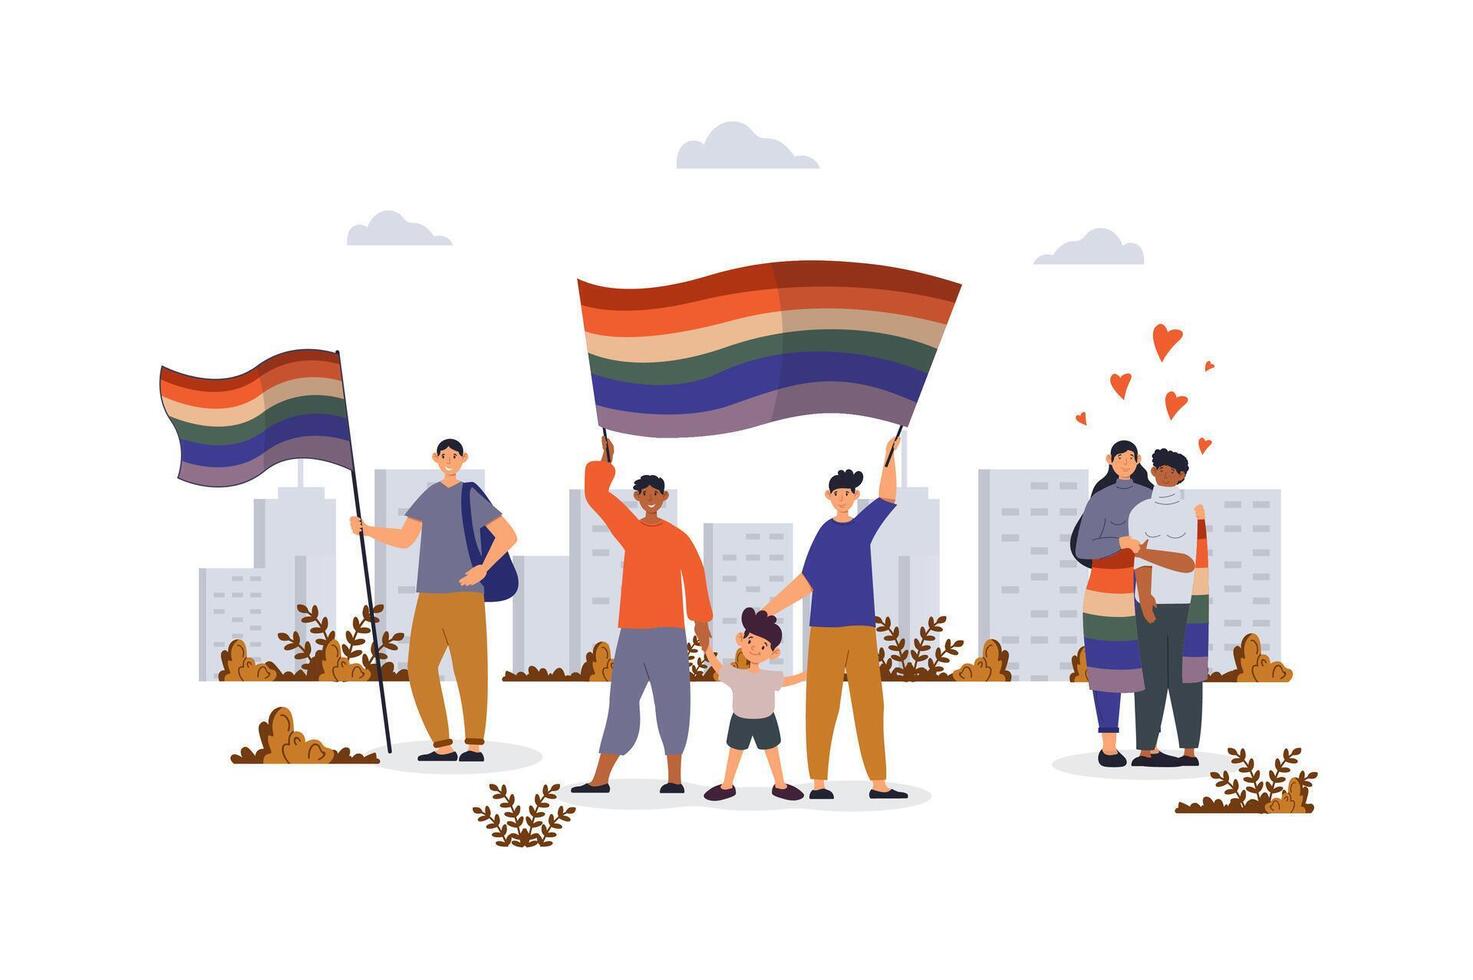 LGBTQ concept with character scene for web. Gays and lesbians couple holding rainbow flag and celebrating pride festival. People situation in flat design. Vector illustration for marketing material.